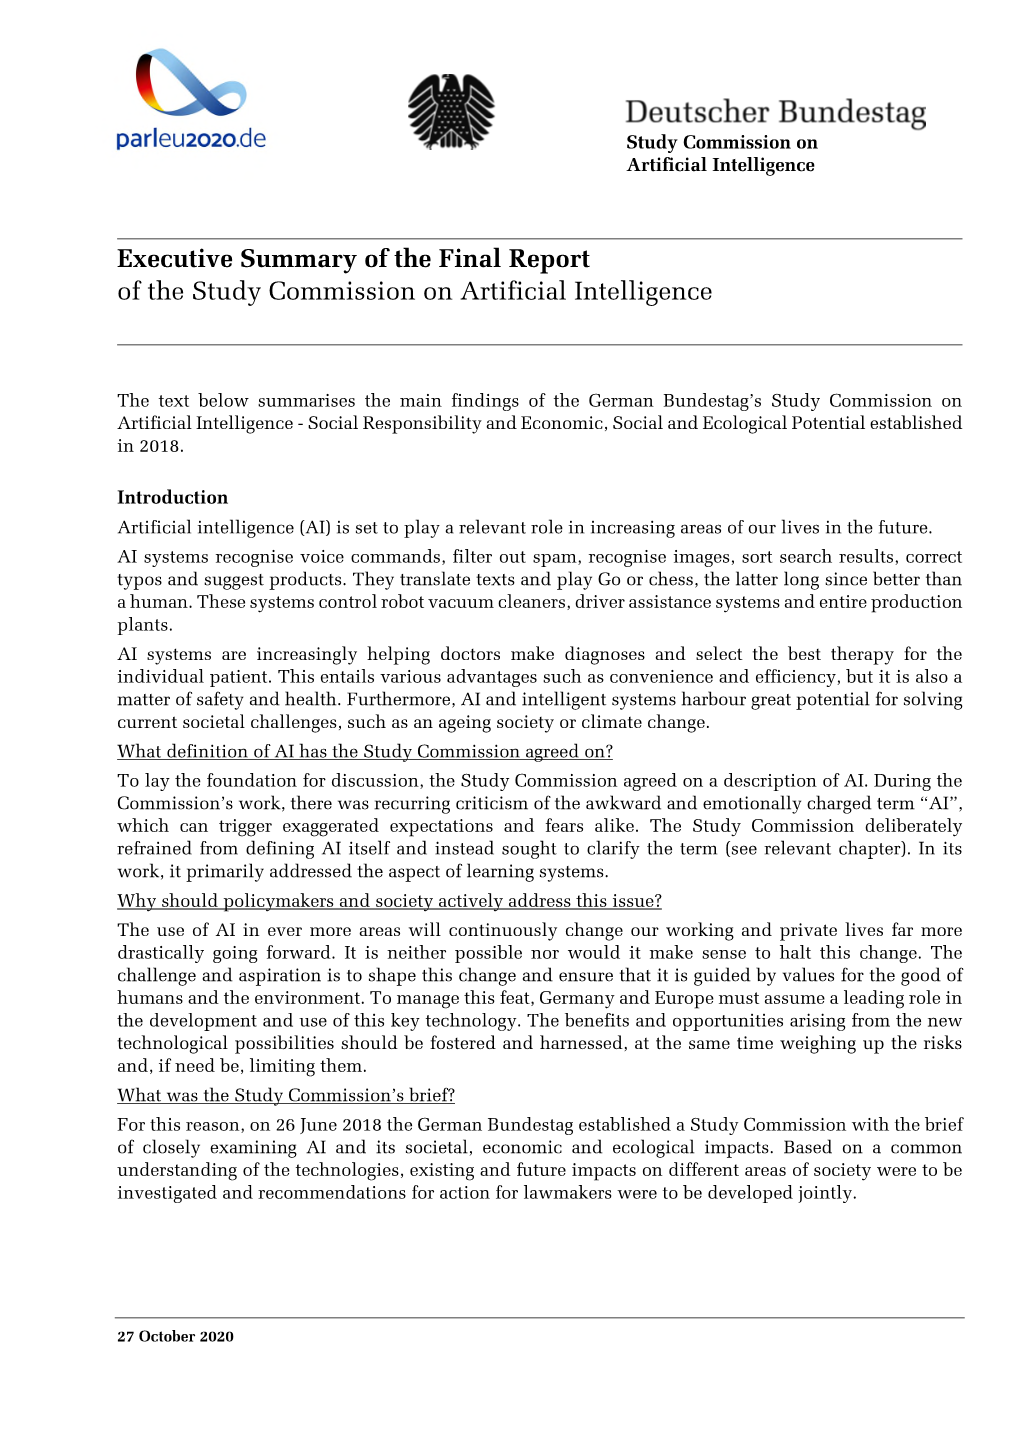 Executive Summary of the Final Report of the Study Commission on Artificial Intelligence